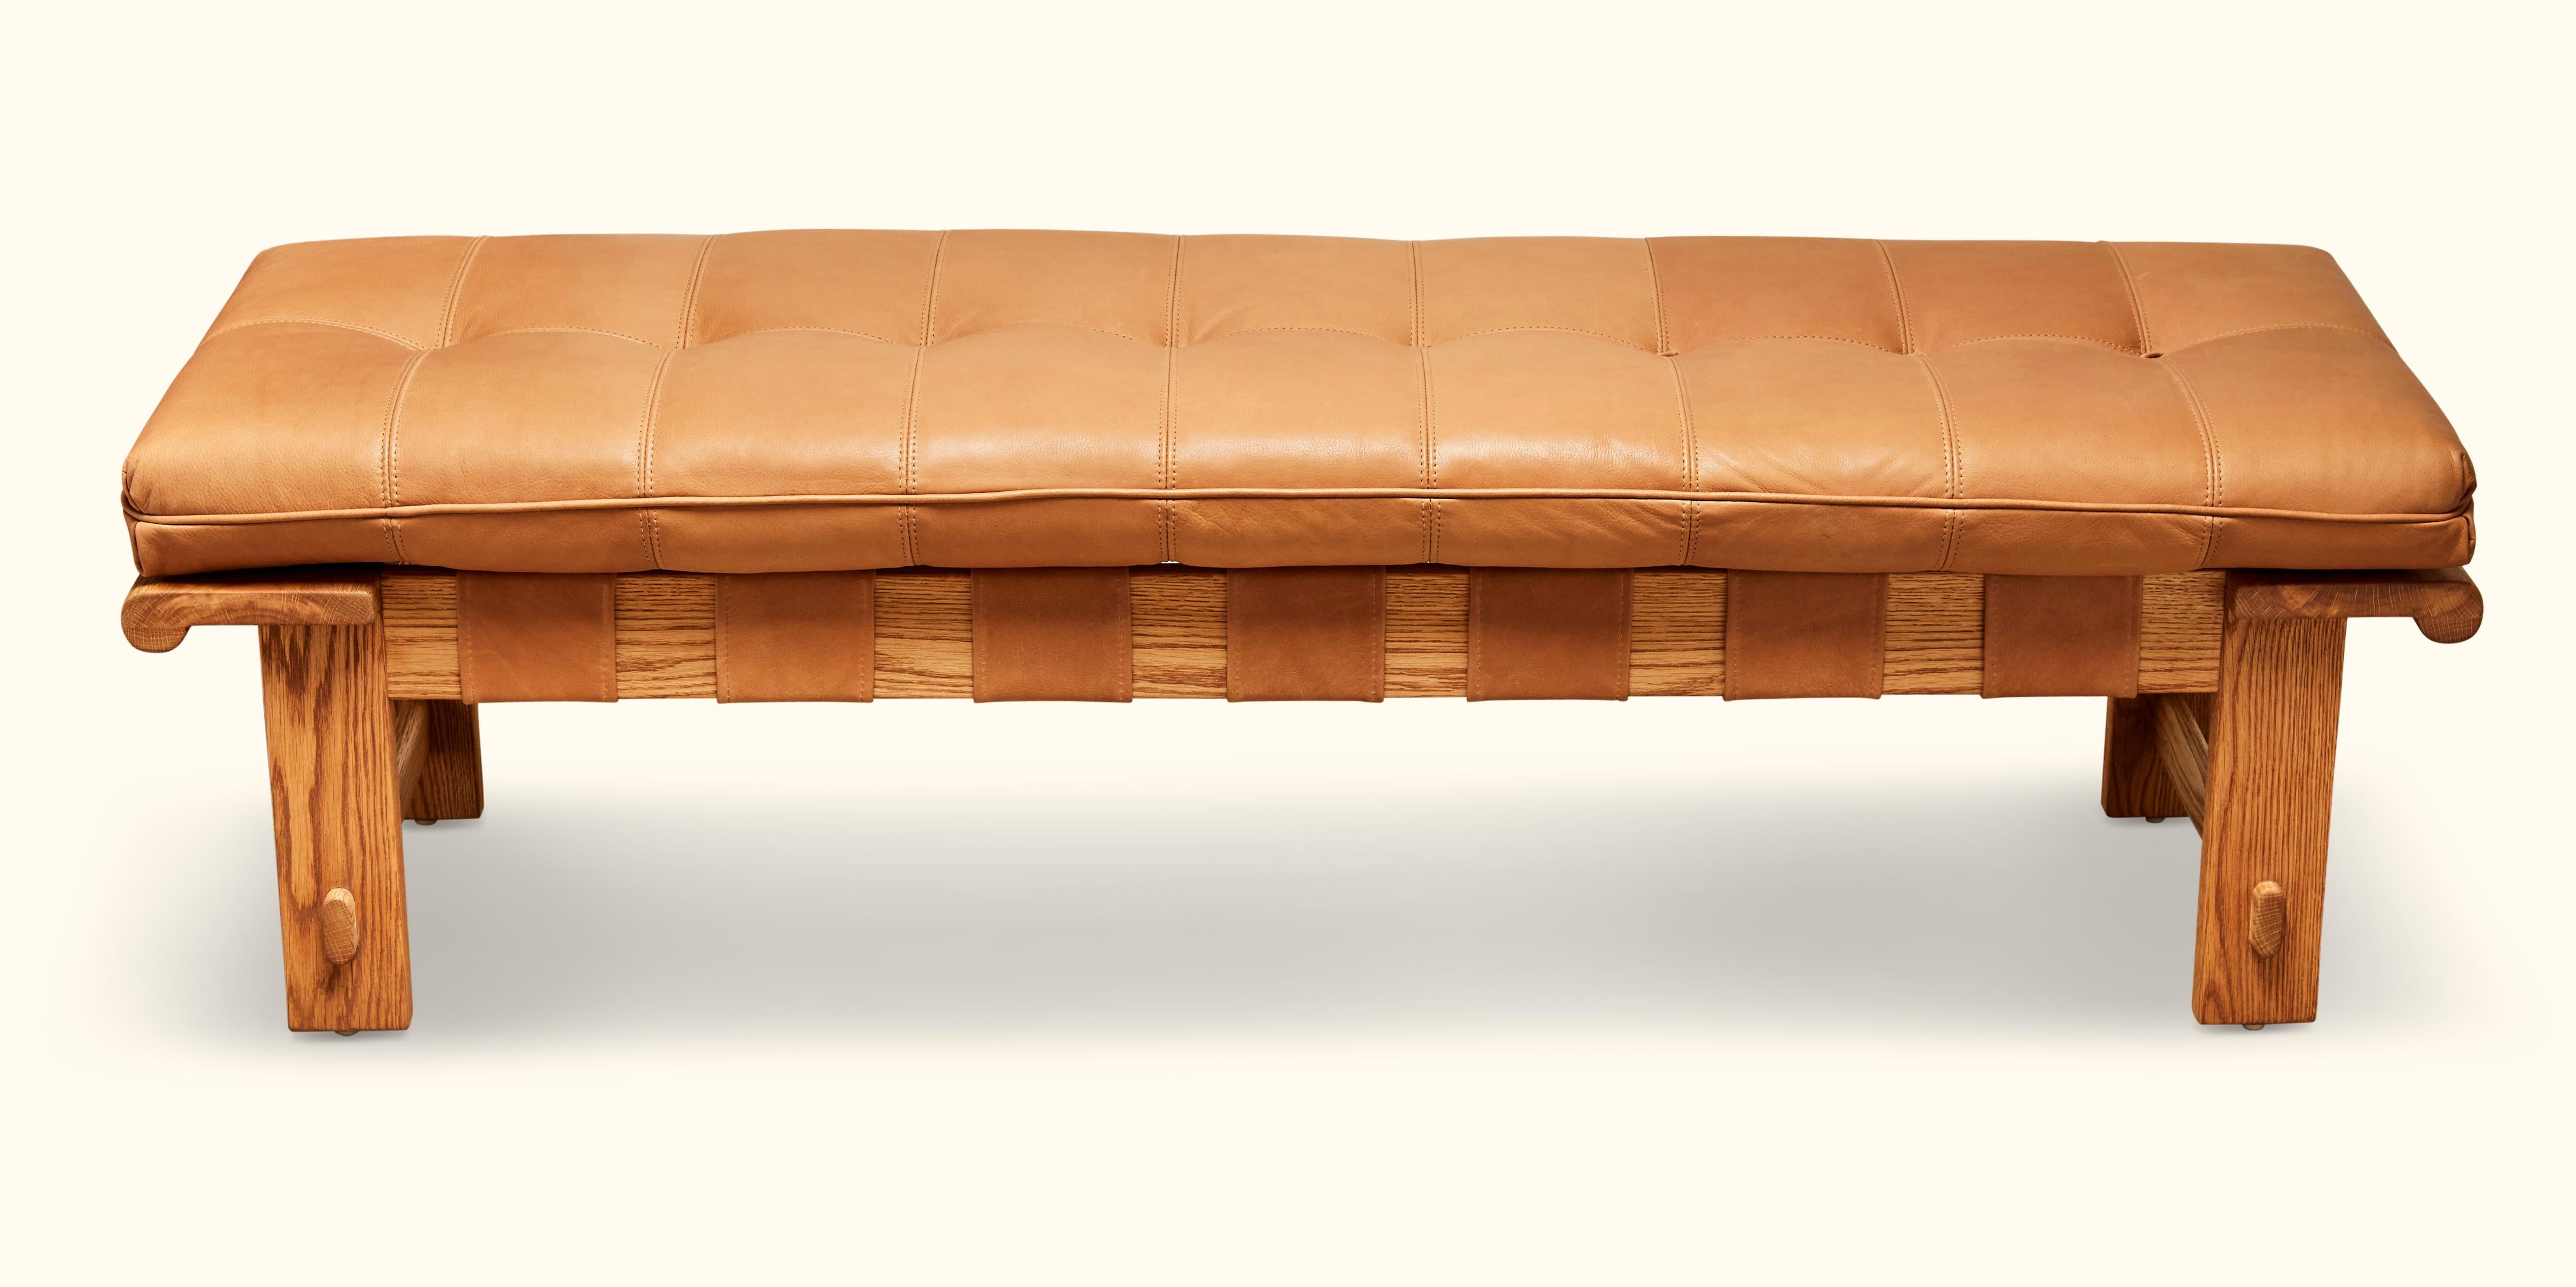 tufted leather bench cushion